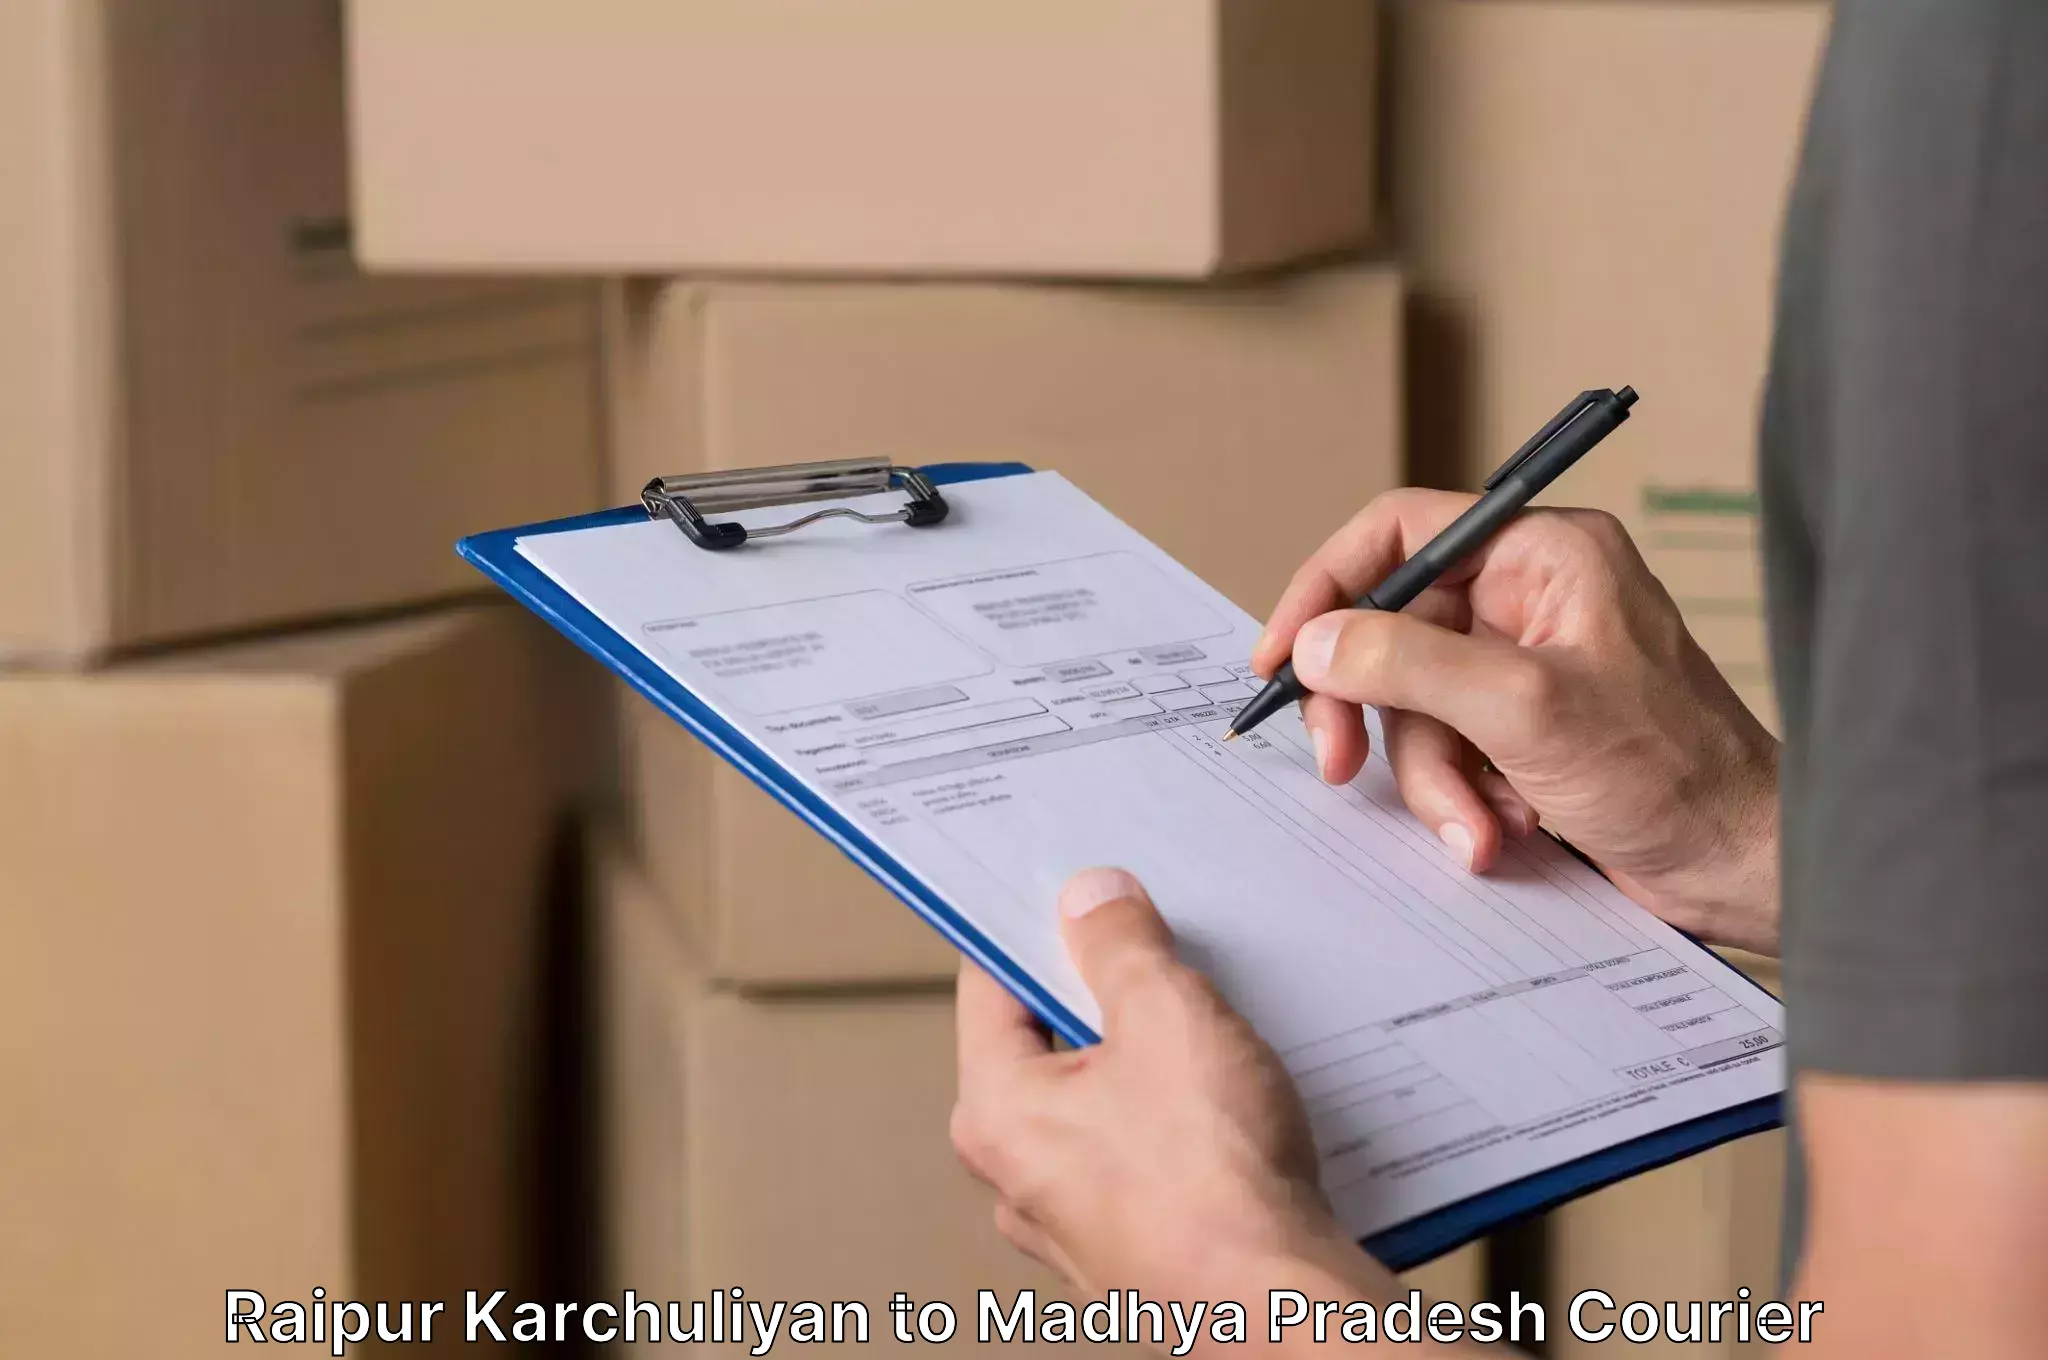 Professional furniture movers Raipur Karchuliyan to Neemuch